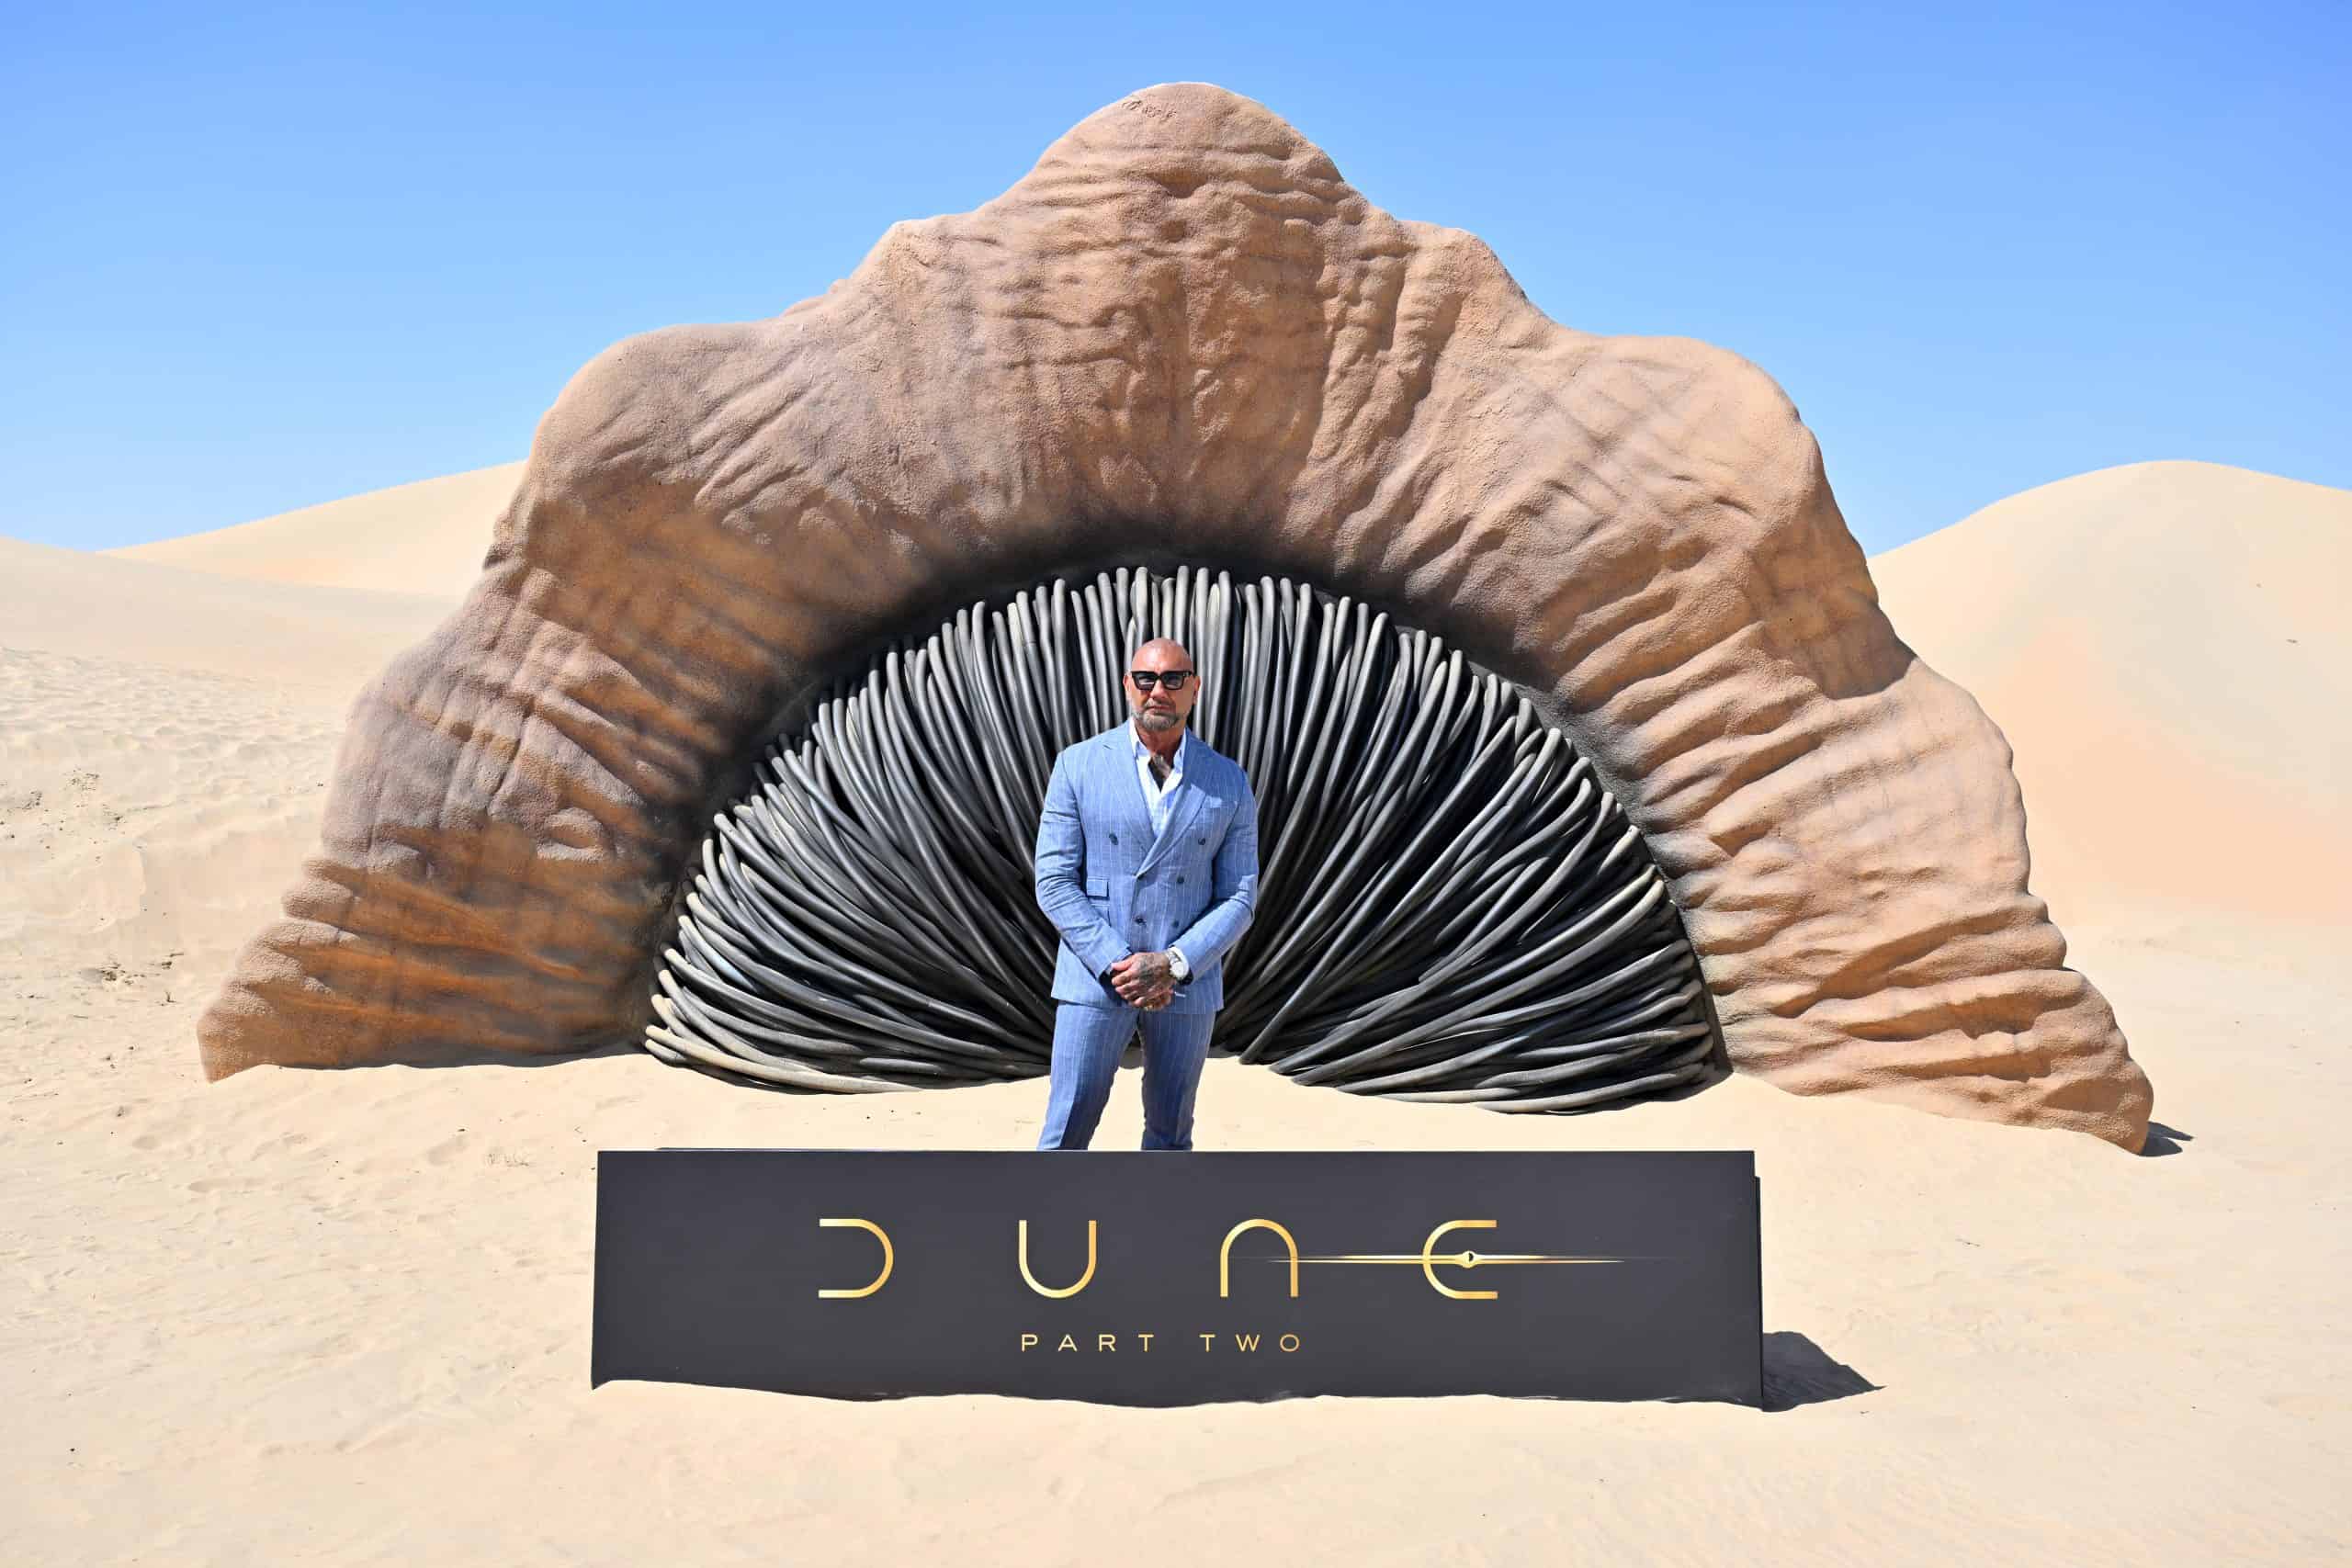 "Dune" Part Two Photocall In Abu Dhabi